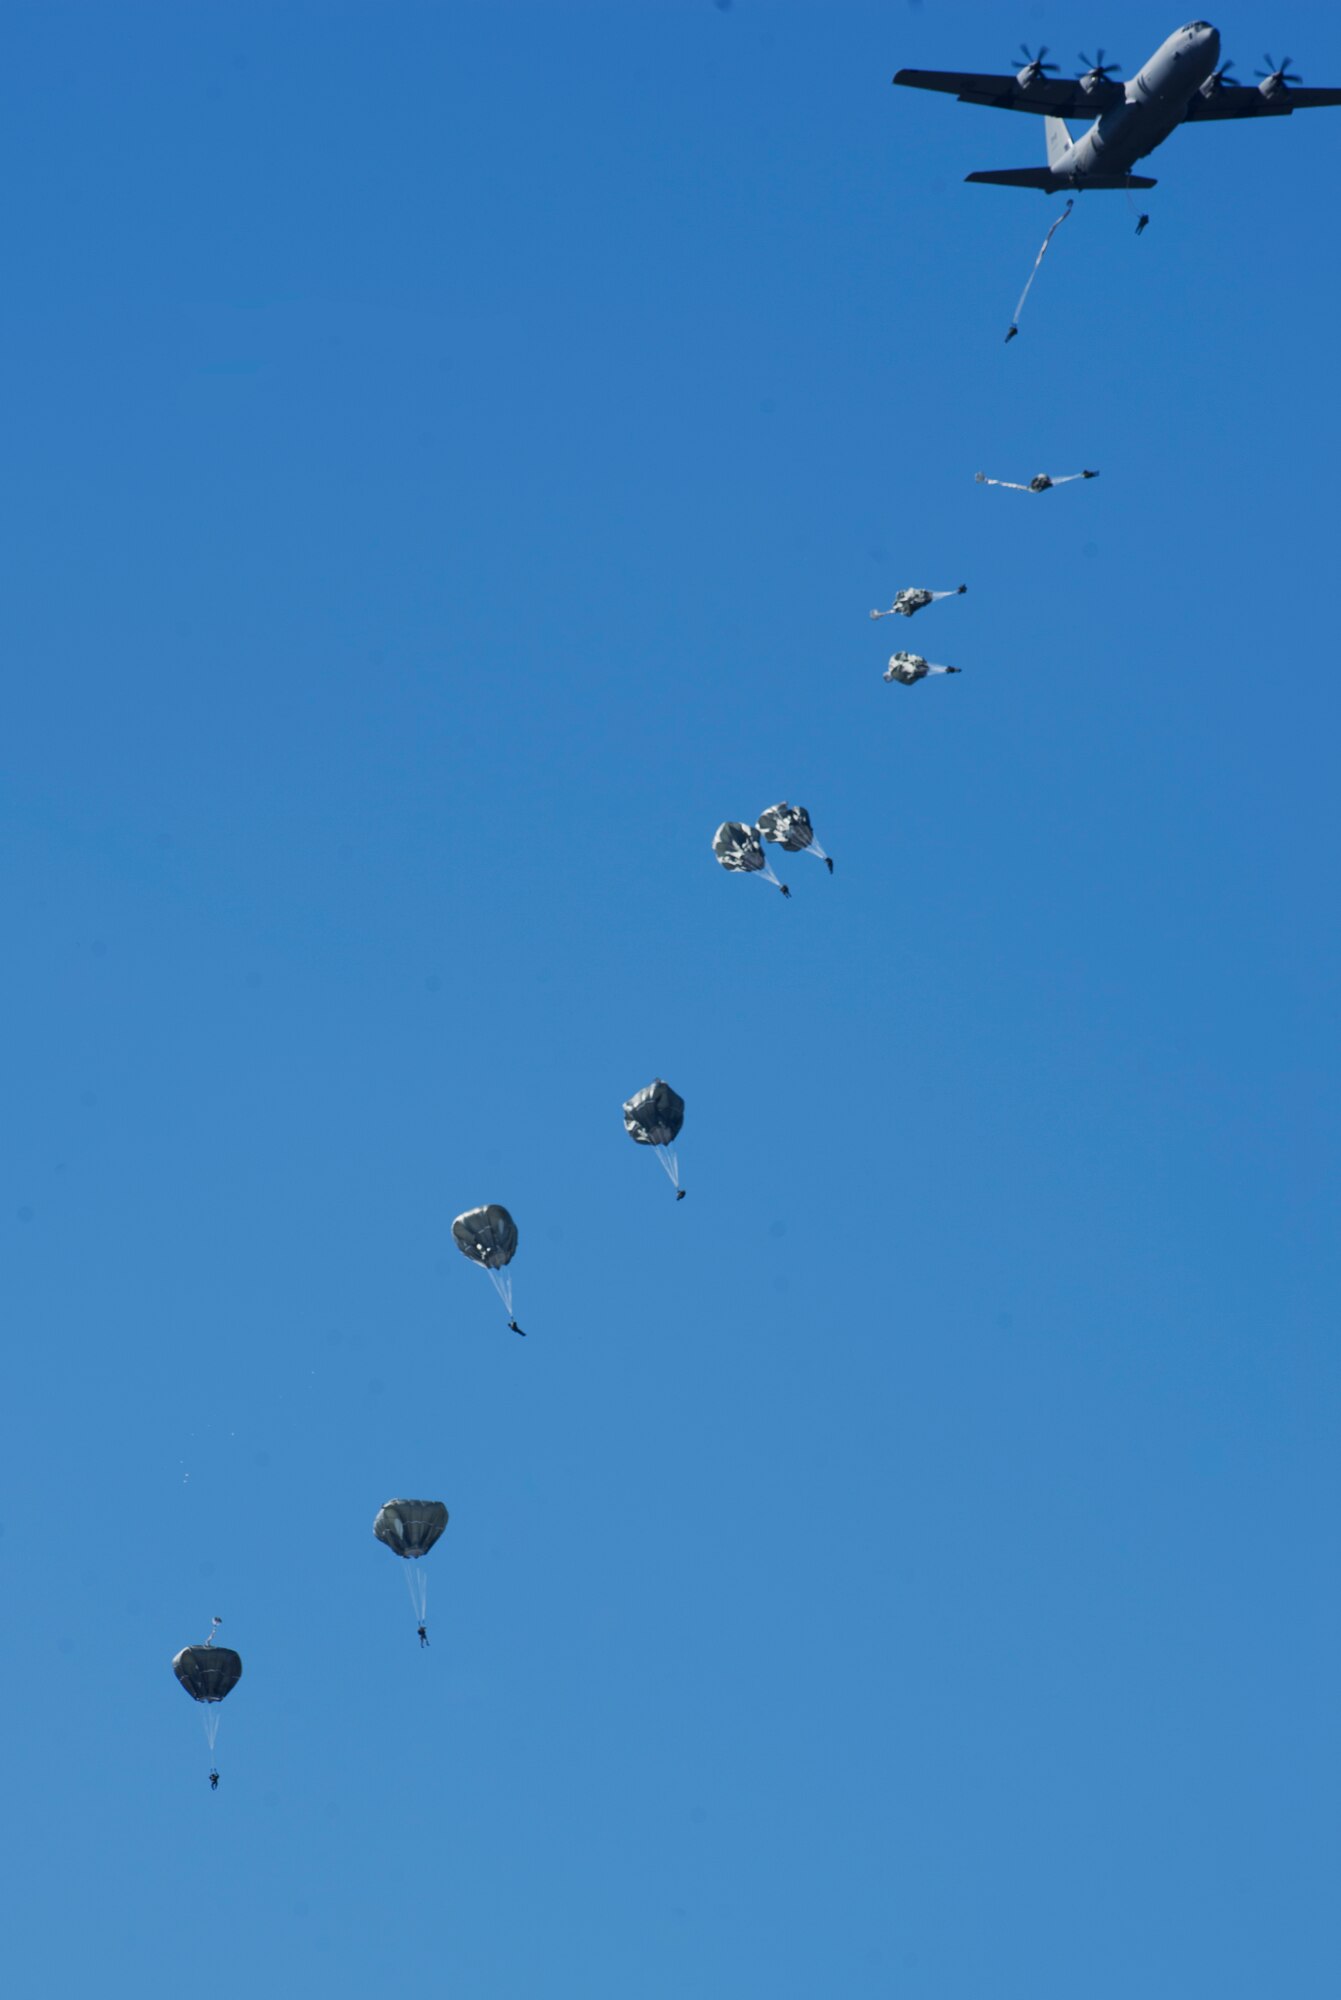 U.S. Soldiers with the 82nd Airborne Division conduct a static line airdrop from an Air Force C-130J Hercules aircraft during Joint Operational Access Exercise (JOAX) 13-2 at Camp Mackall, N.C., Feb. 24, 2013. A JOAX is designed to enhance cohesiveness between U.S. Army, Air Force and allied personnel, allowing the services an opportunity to properly execute large-scale heavy equipment and troop movement. (U.S. Air Force photo by Airman 1st Class Kyle Russell/Released)
